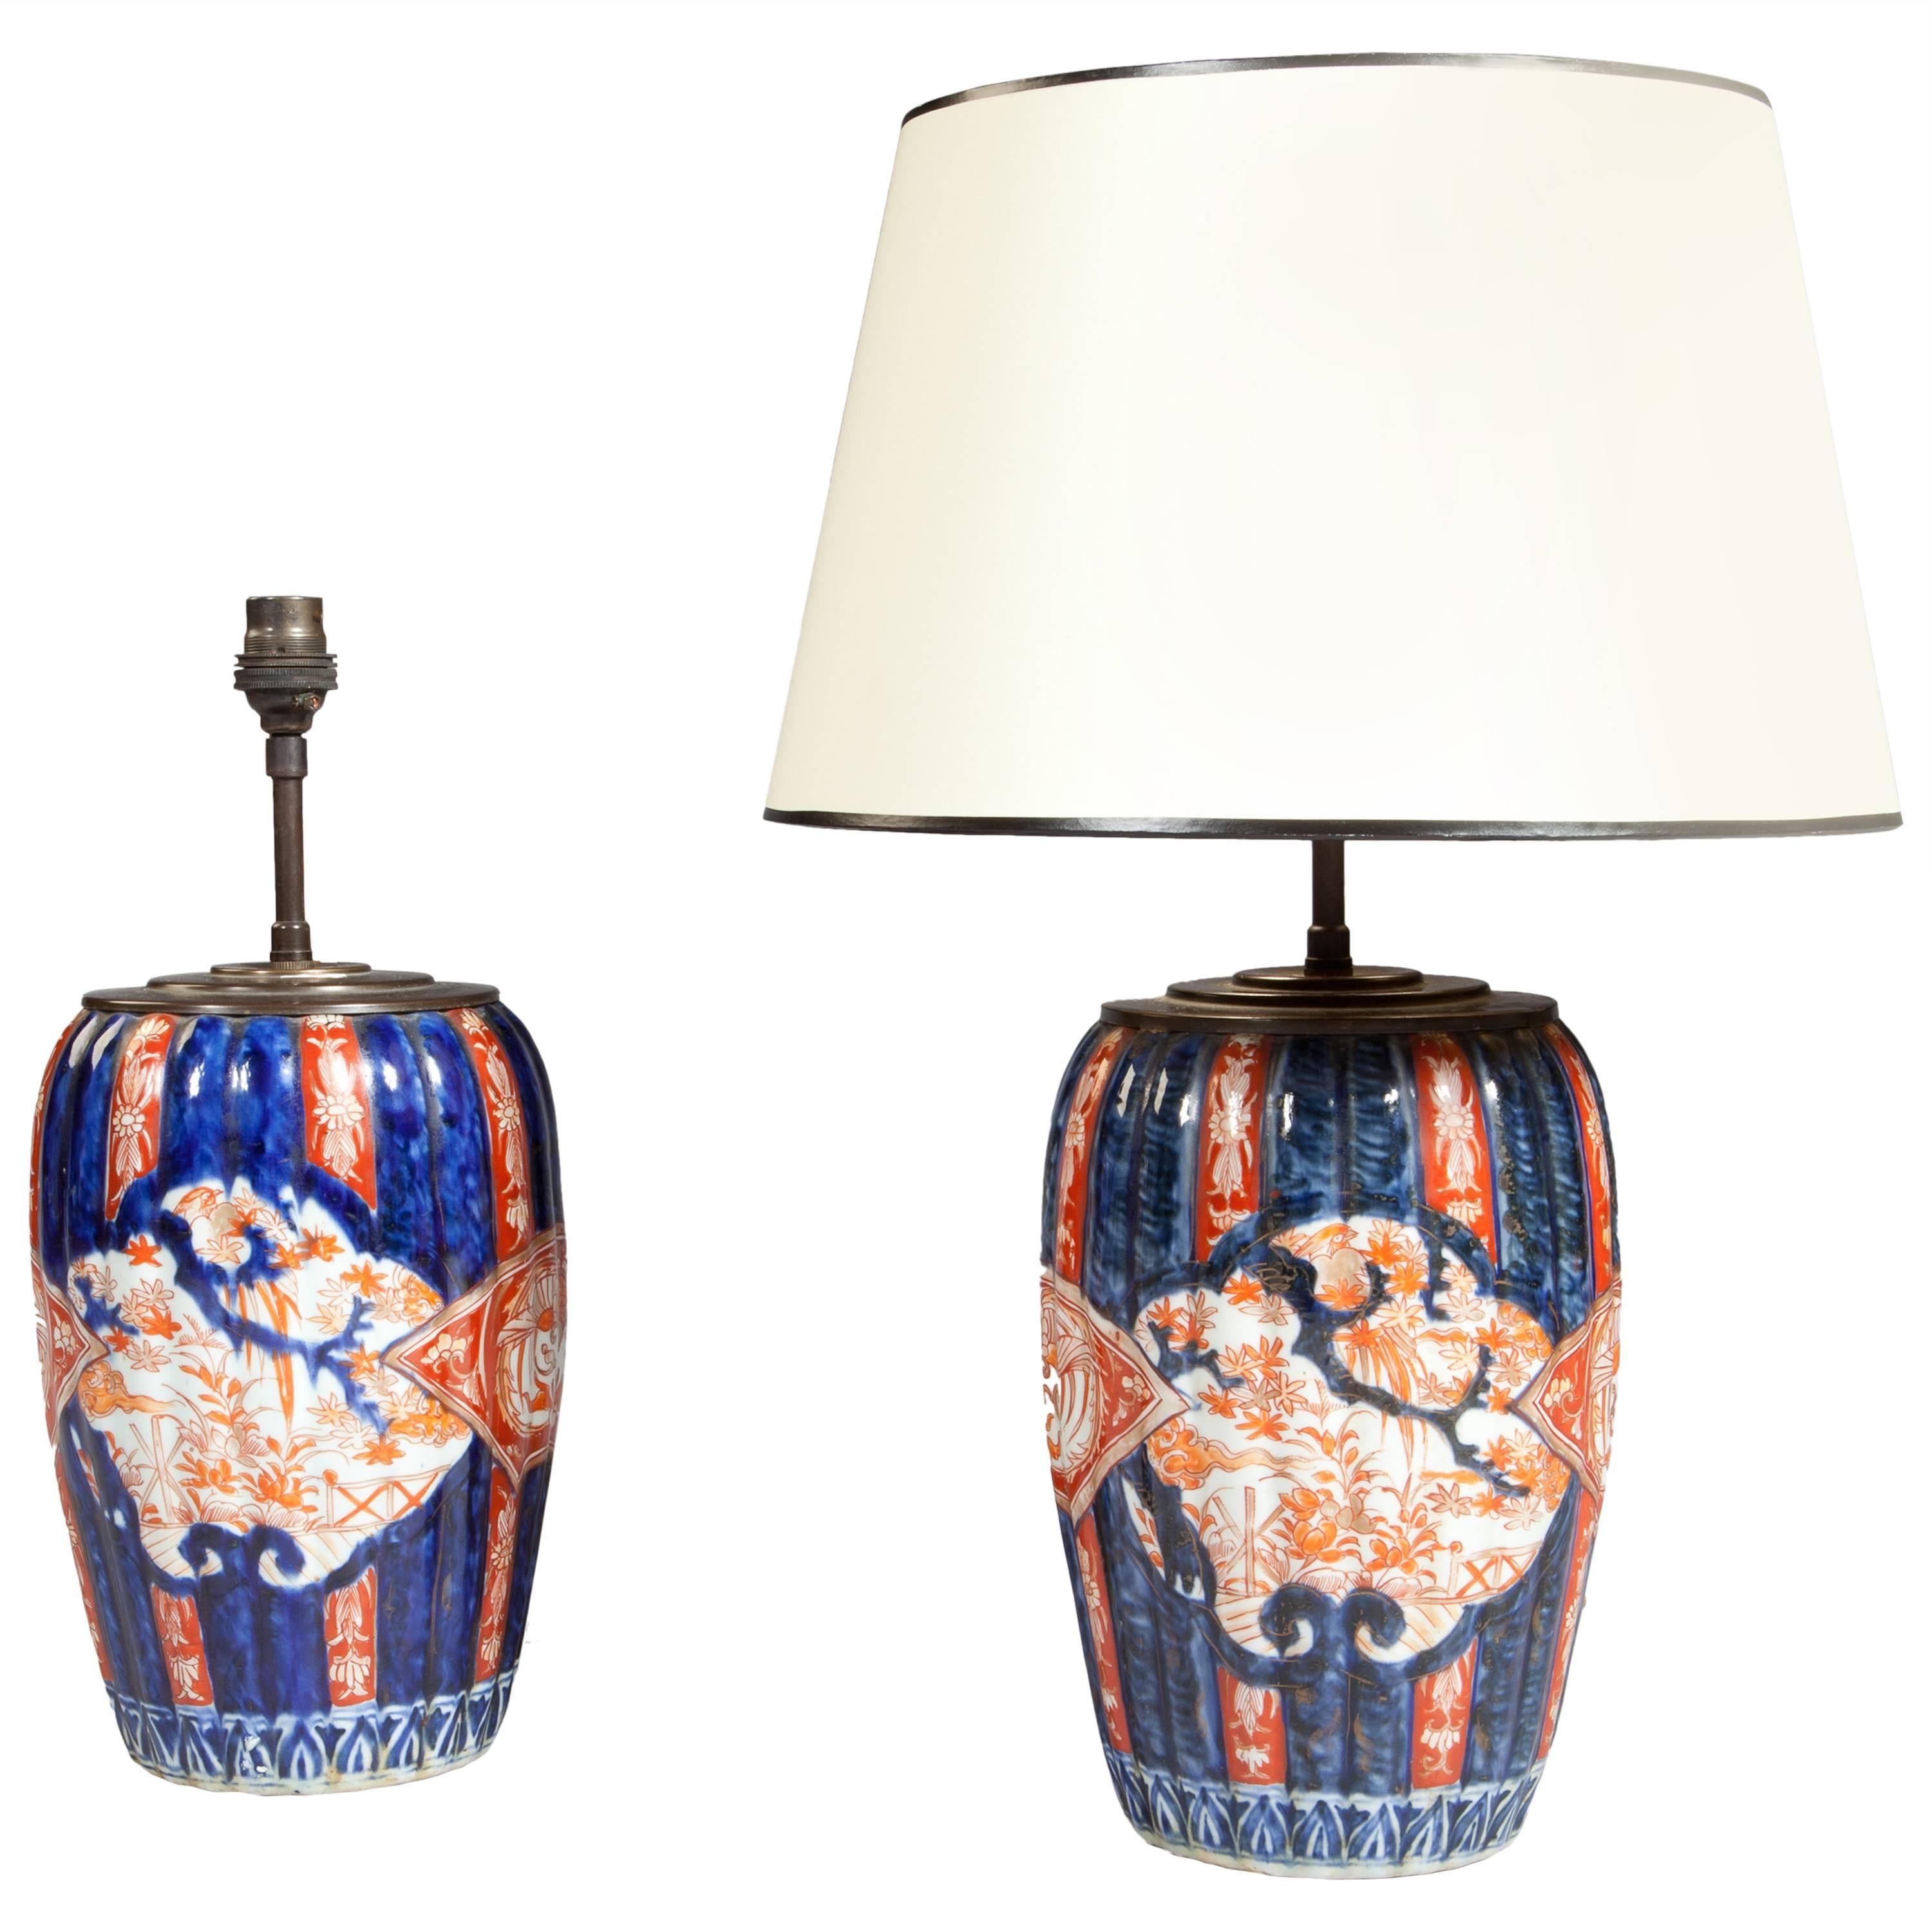 Fine Pair of Small-Scale Japanese Imari Lamps